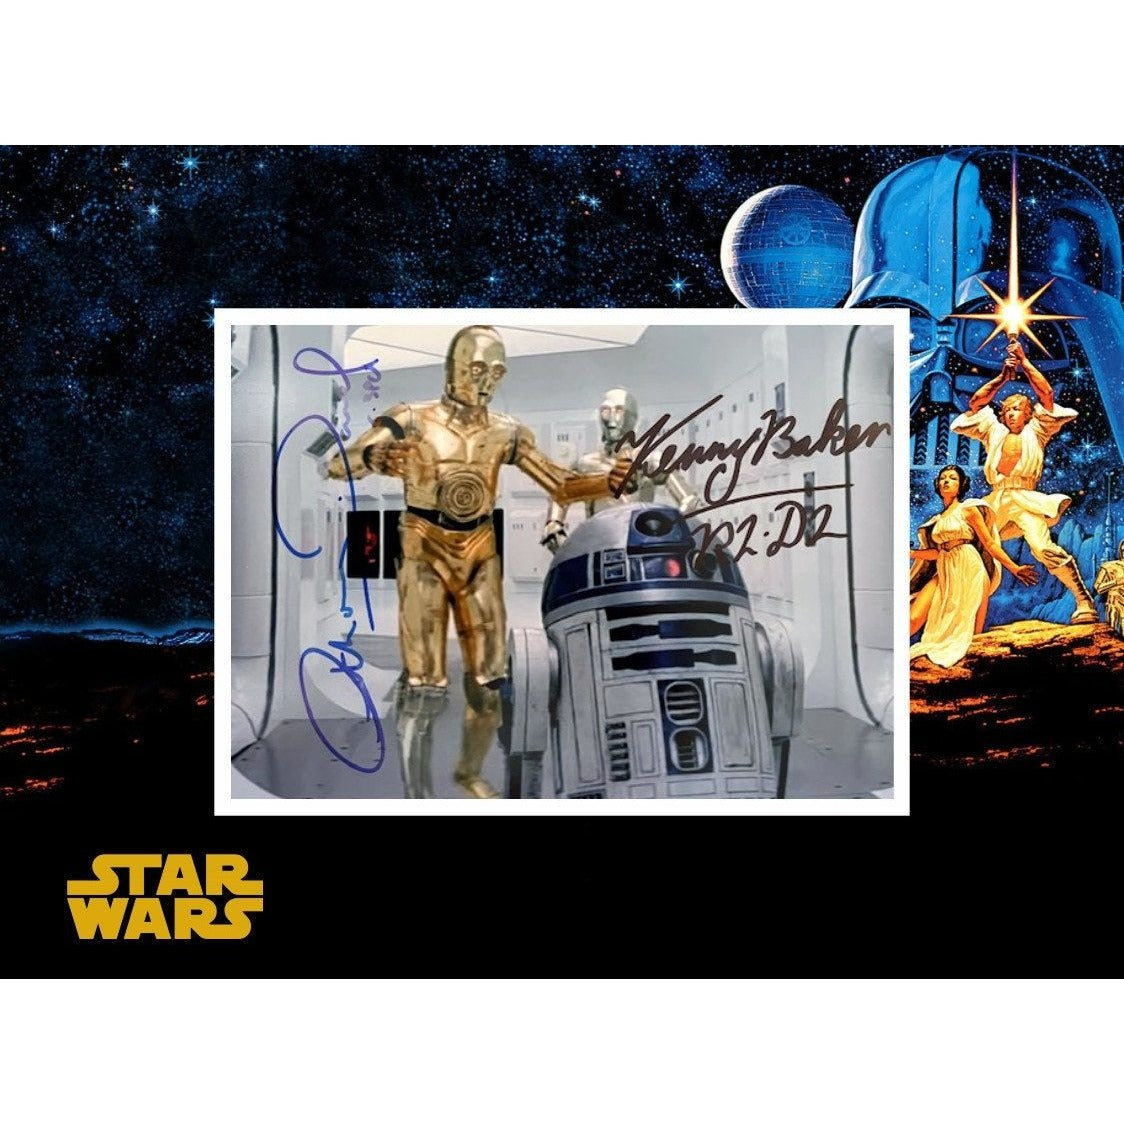 Anthony Daniels C-3PO Kenny Baker R 2 d 2 Star Wars 5 x 7 photo signed